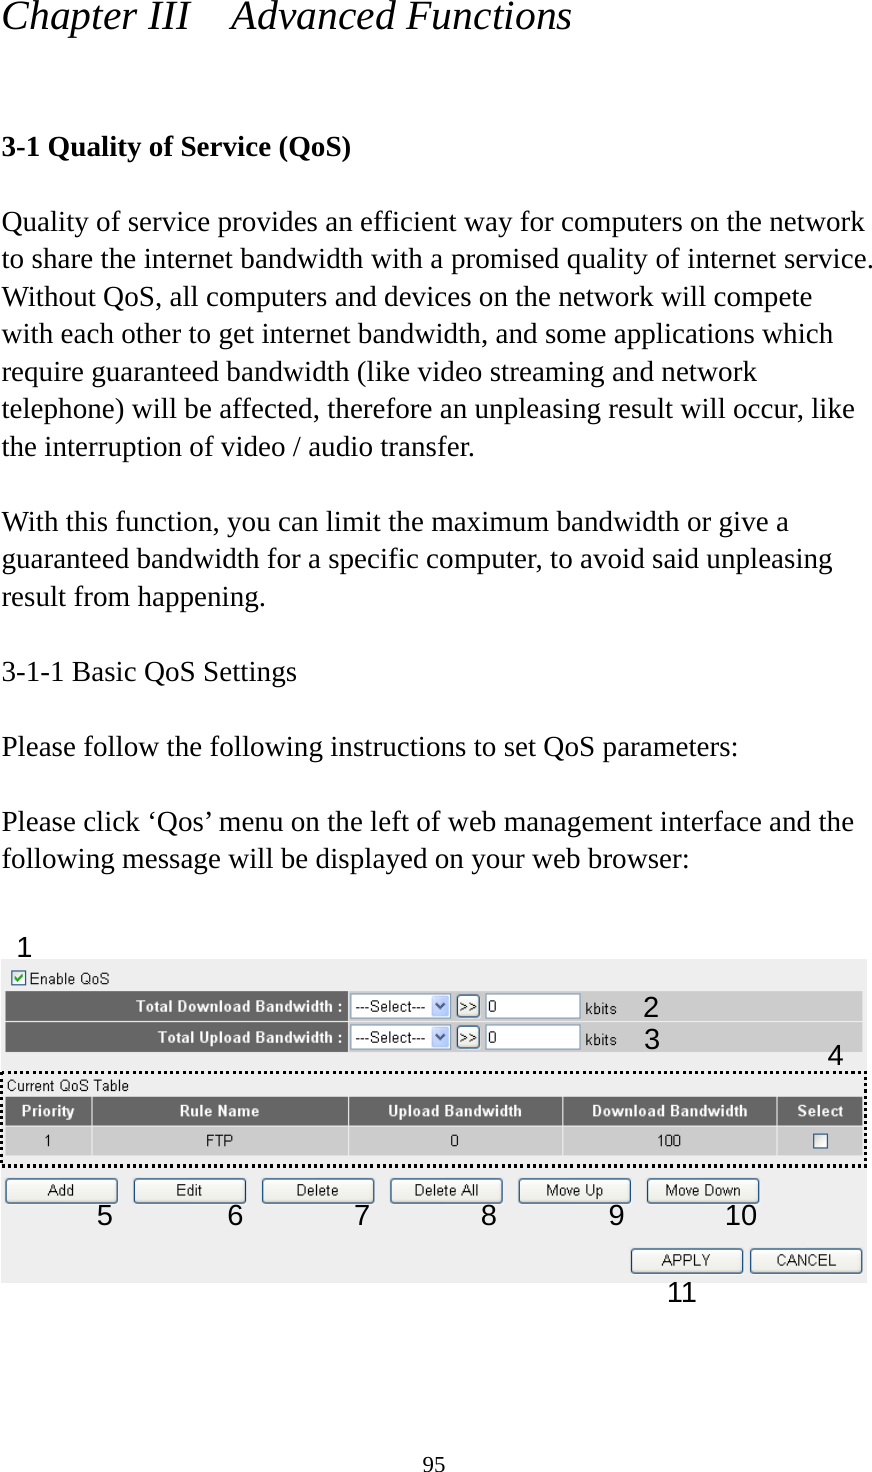 95 Chapter III    Advanced Functions  3-1 Quality of Service (QoS)  Quality of service provides an efficient way for computers on the network to share the internet bandwidth with a promised quality of internet service. Without QoS, all computers and devices on the network will compete with each other to get internet bandwidth, and some applications which require guaranteed bandwidth (like video streaming and network telephone) will be affected, therefore an unpleasing result will occur, like the interruption of video / audio transfer.    With this function, you can limit the maximum bandwidth or give a guaranteed bandwidth for a specific computer, to avoid said unpleasing result from happening.  3-1-1 Basic QoS Settings  Please follow the following instructions to set QoS parameters:  Please click ‘Qos’ menu on the left of web management interface and the following message will be displayed on your web browser:       1 2 34 5 6 7 8 9 10 11 